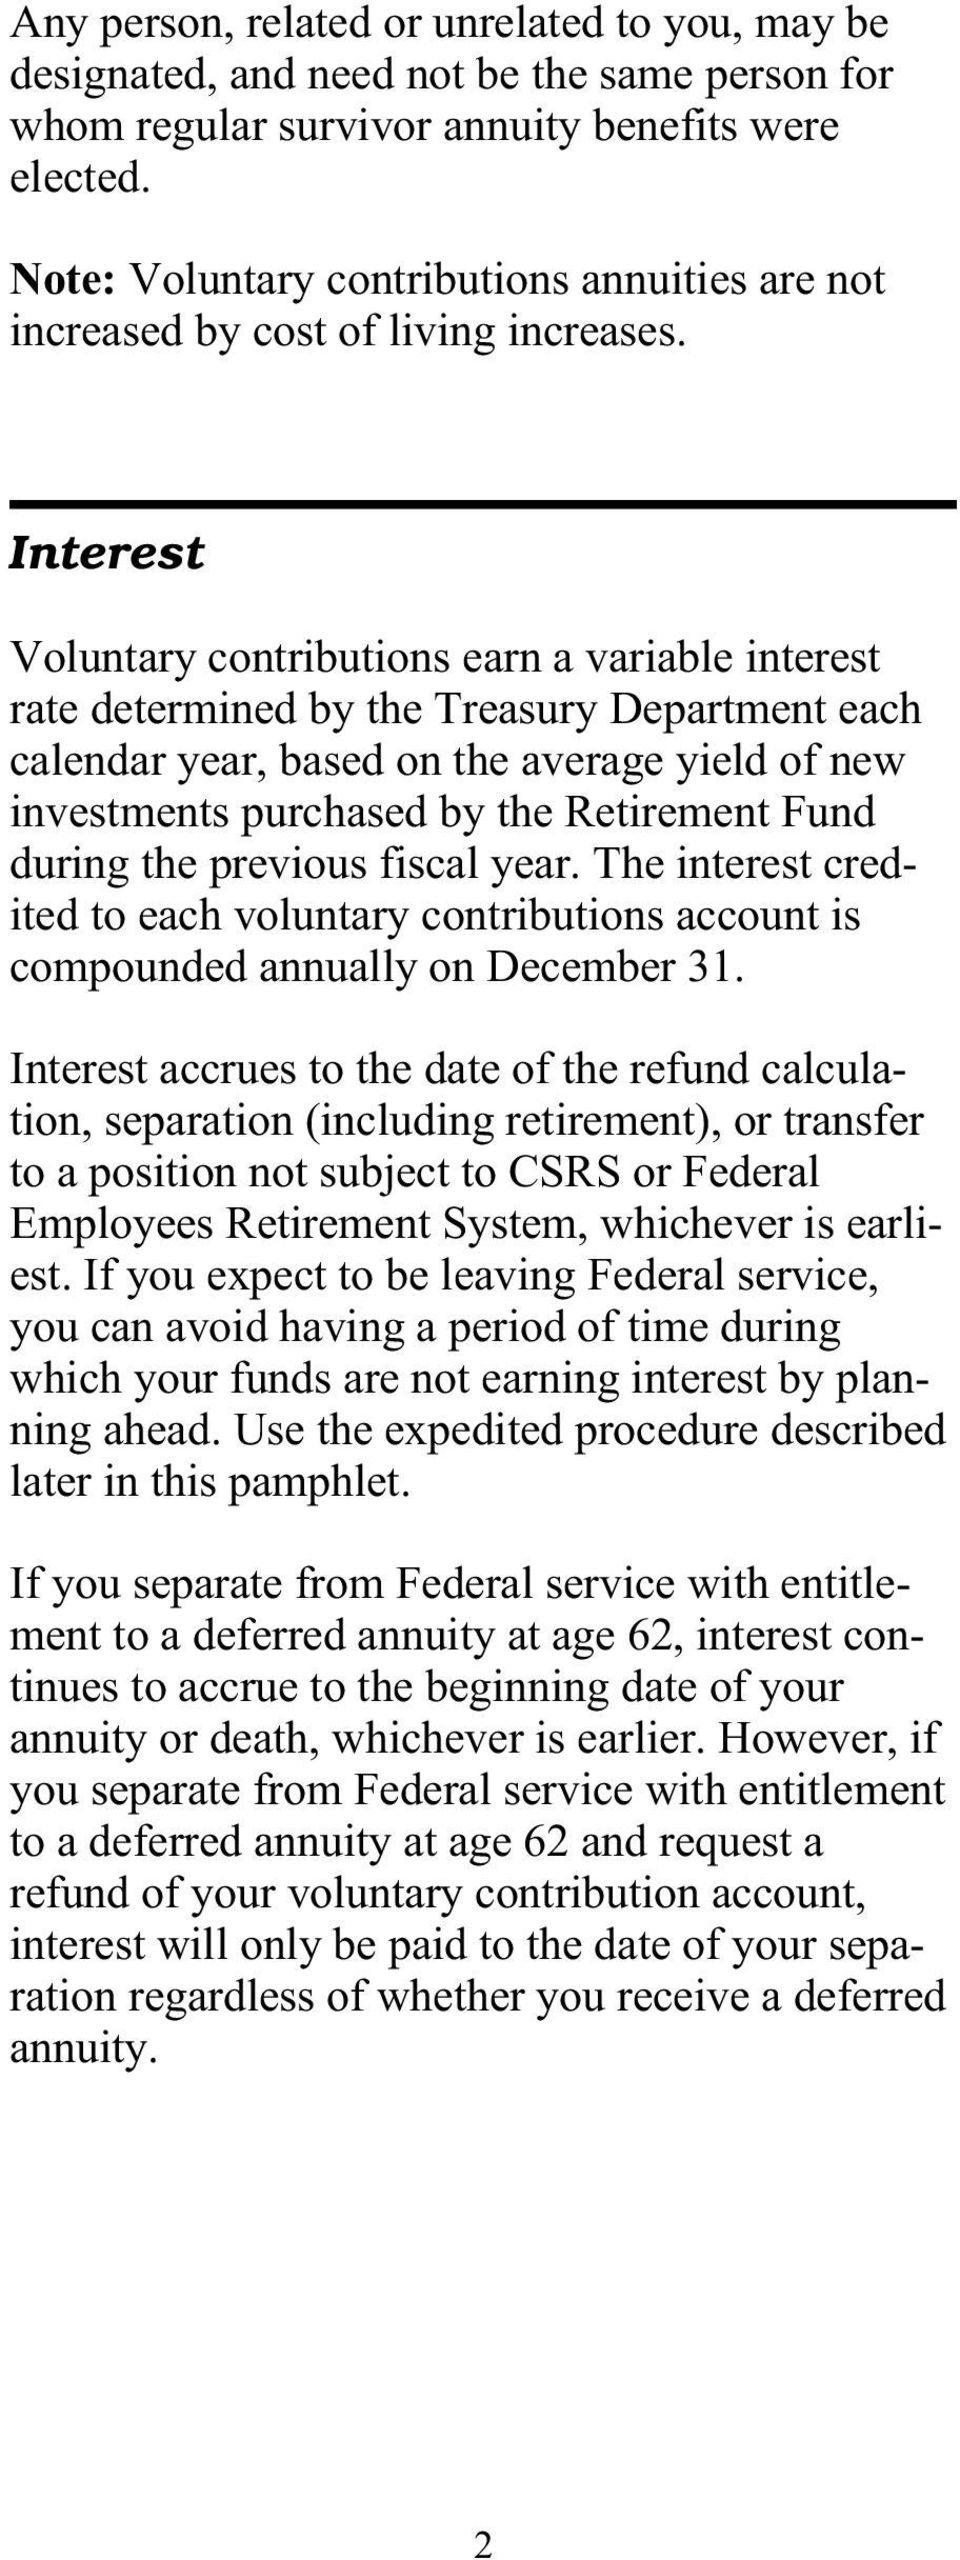 Interest Voluntary contributions earn a variable interest rate determined by the Treasury Department each calendar year, based on the average yield of new investments purchased by the Retirement Fund